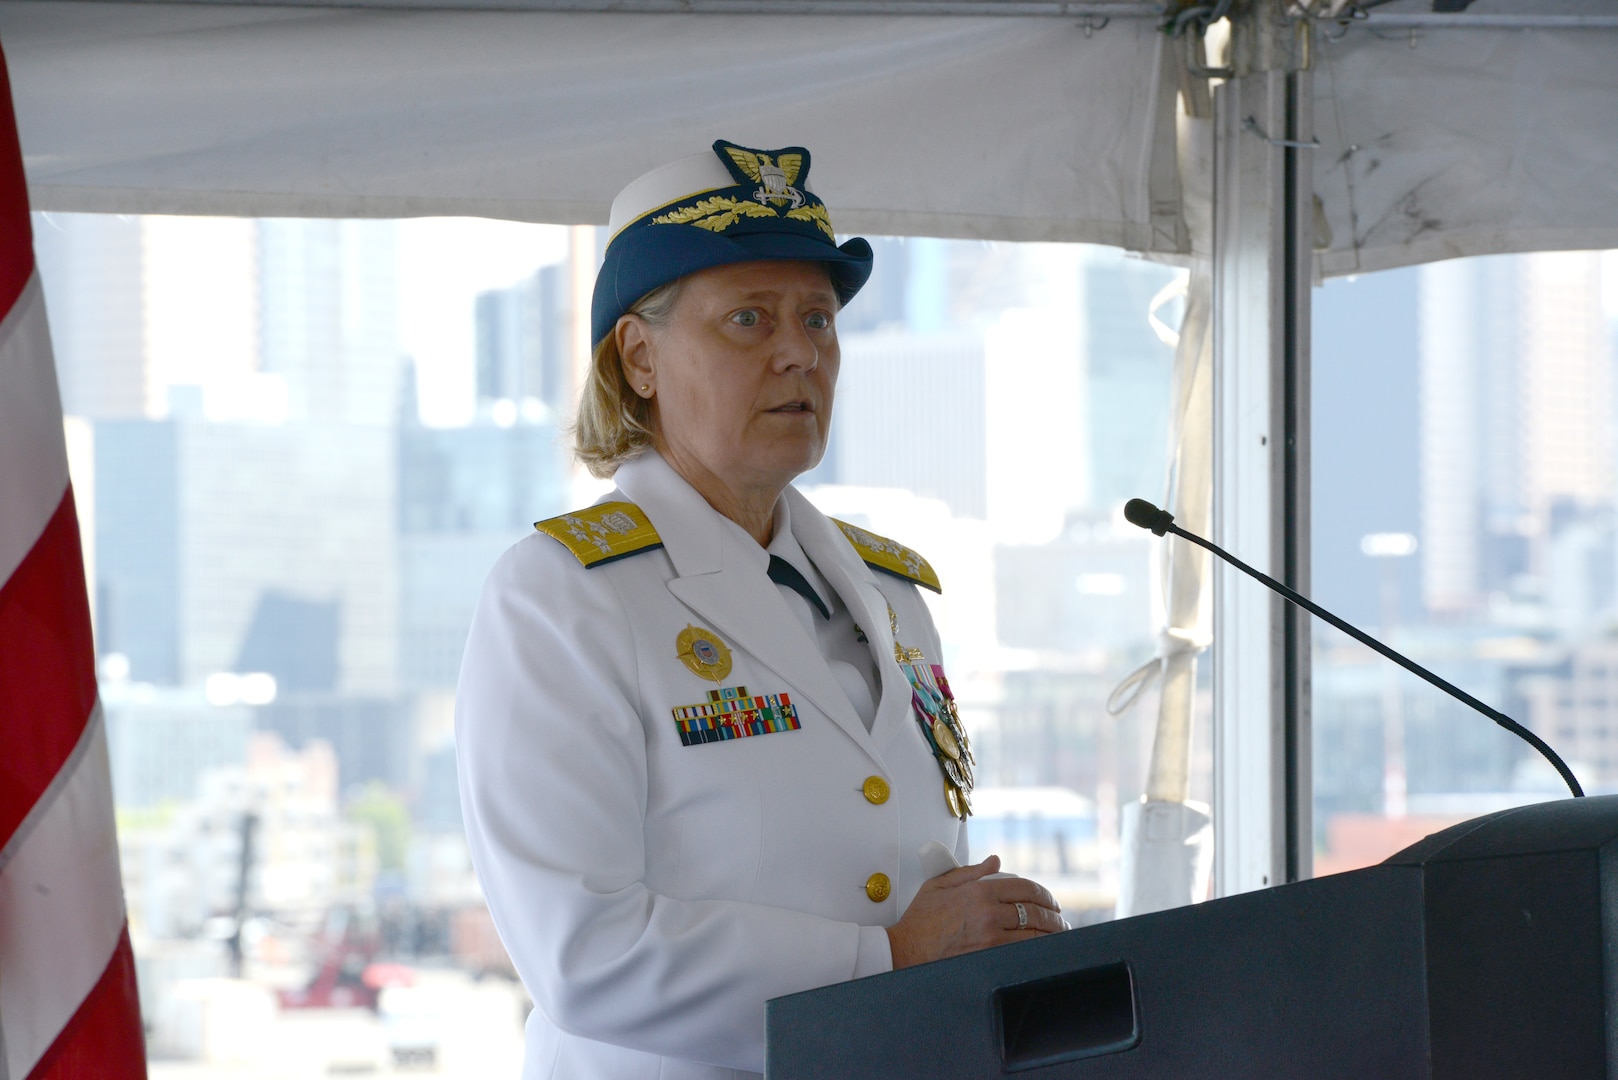 Adm. Linda Fagan, commandant of the Coast Guard, addresses attendees during a change of command ceremony aboard Coast Guard Cutter Healy (WAGB 20), June 29, 2023, at Base Seattle. During the ceremony, Capt. Michele Schallip assumed command of Healy after relieving Capt. Kenneth Boda. (U.S. Coast Guard photo by Petty Officer 2nd Class Michael Clark)